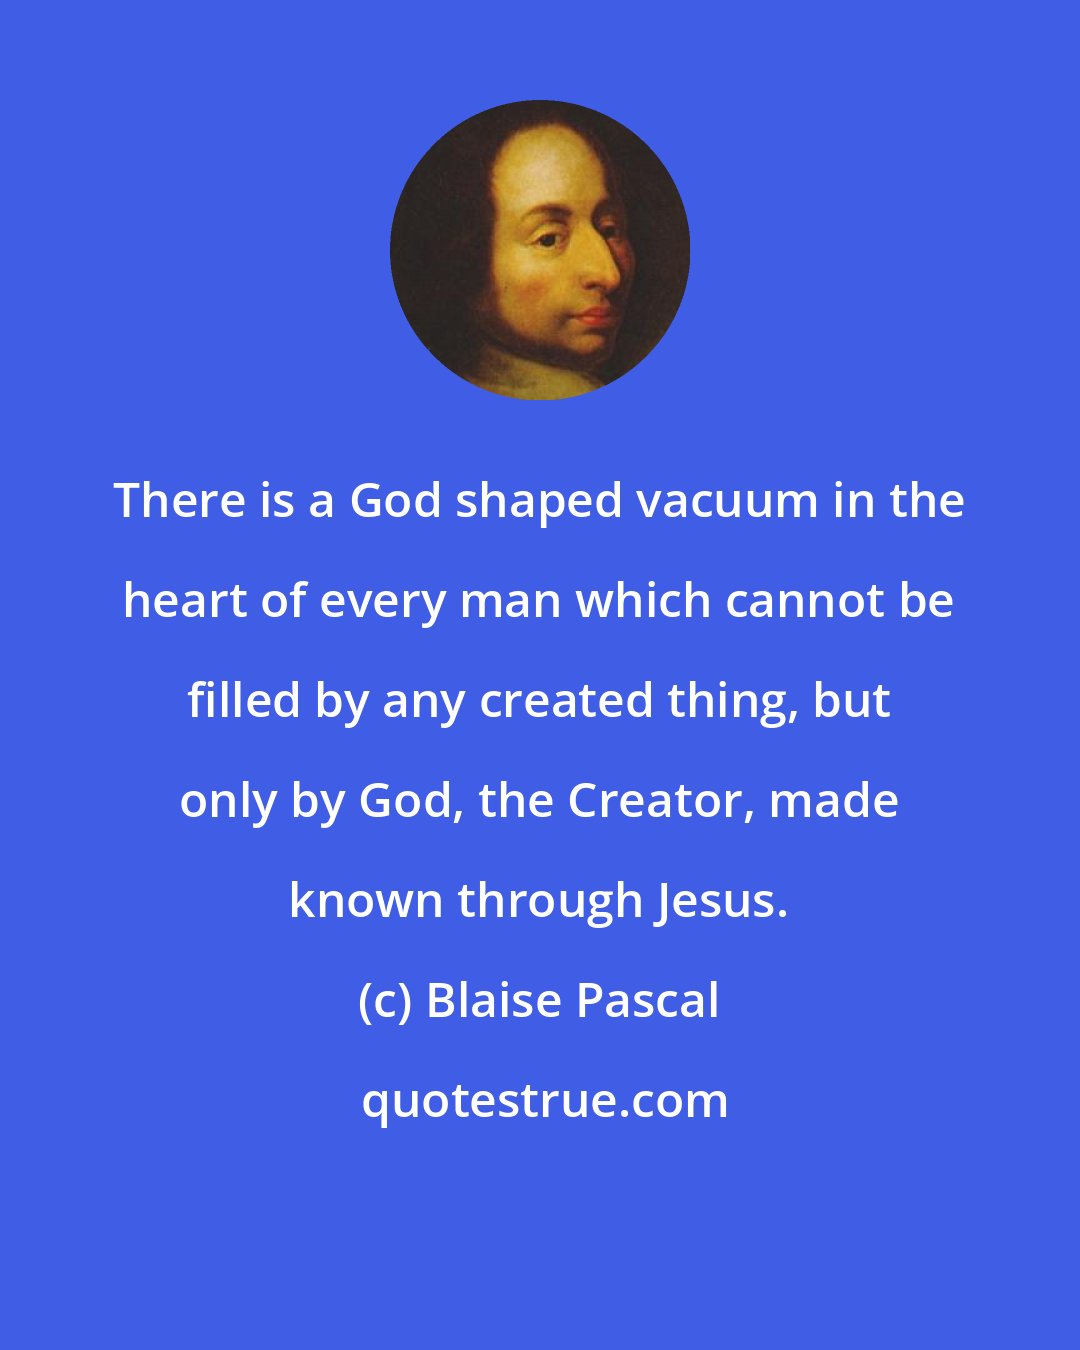 Blaise Pascal: There is a God shaped vacuum in the heart of every man which cannot be filled by any created thing, but only by God, the Creator, made known through Jesus.